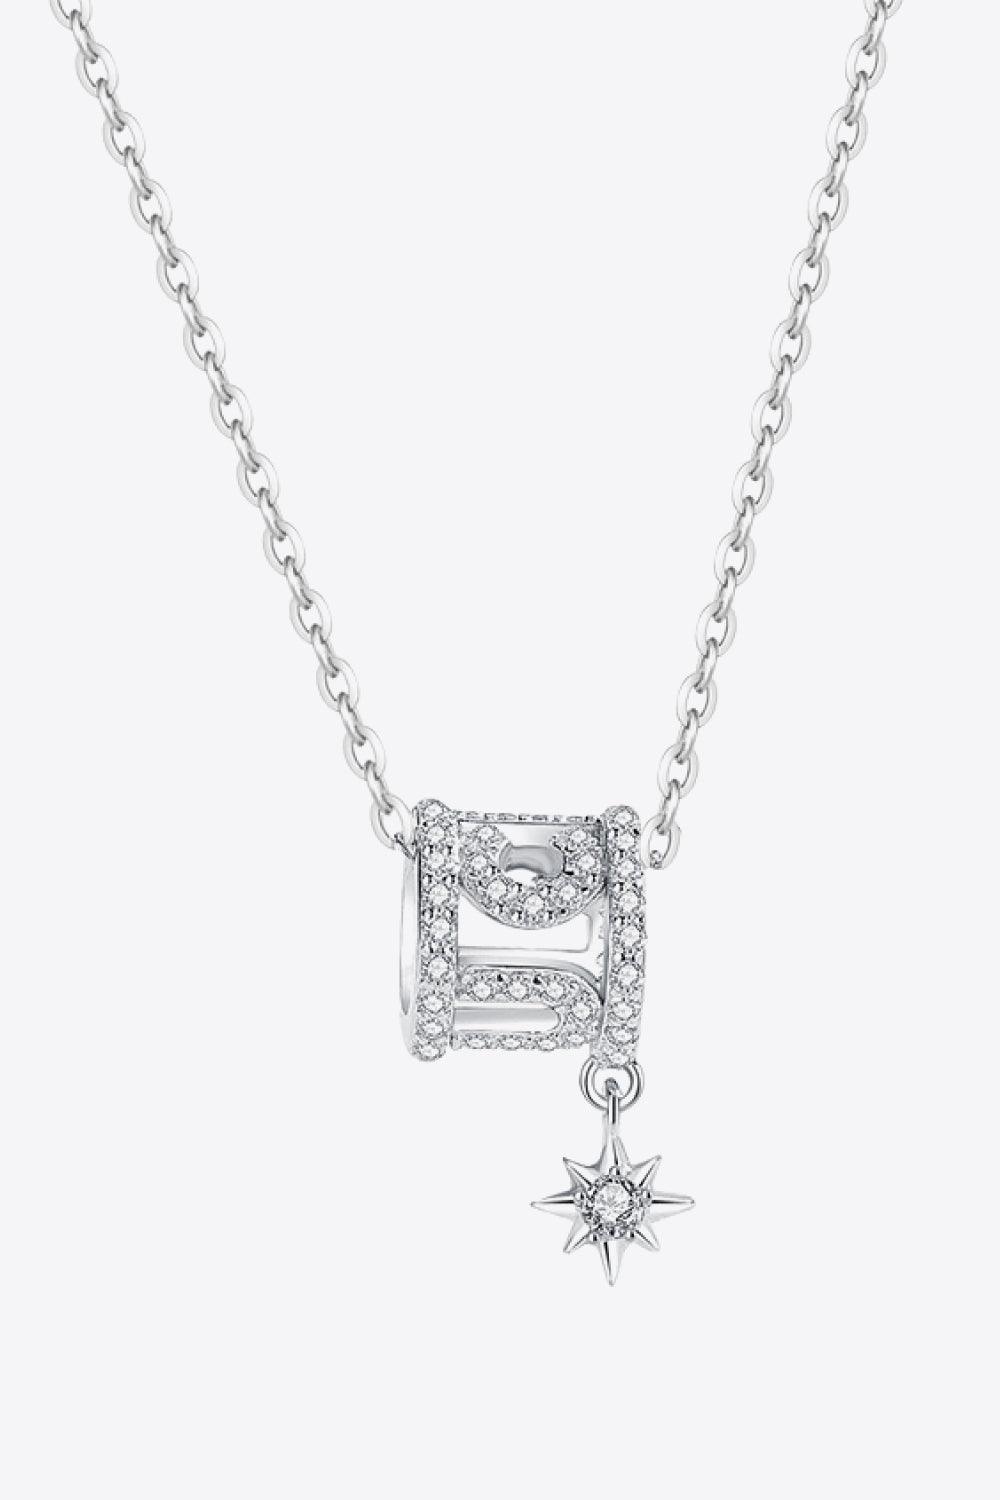 Rely On Fate Cubic Zirconia Pendant Necklace - Trendha